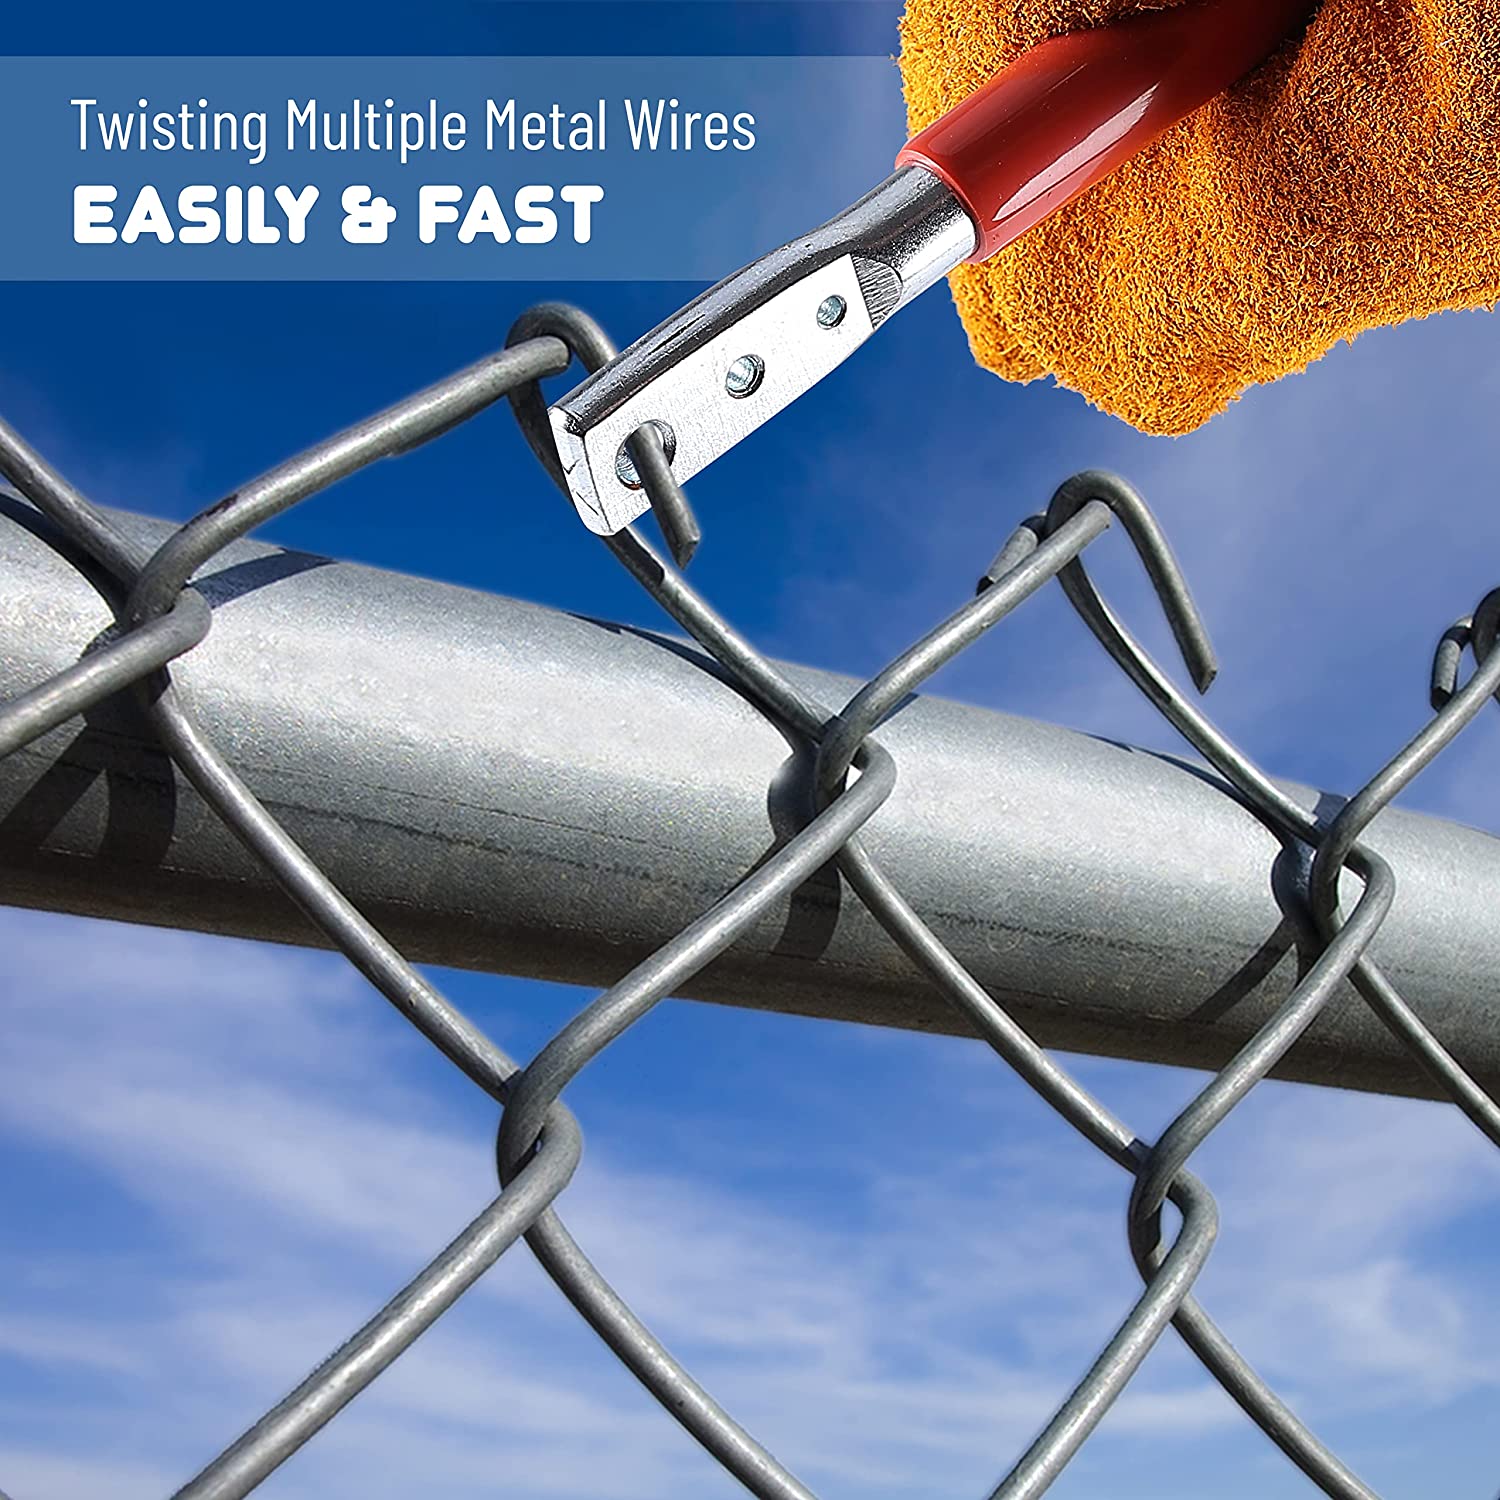 Twist Tools for tying wire